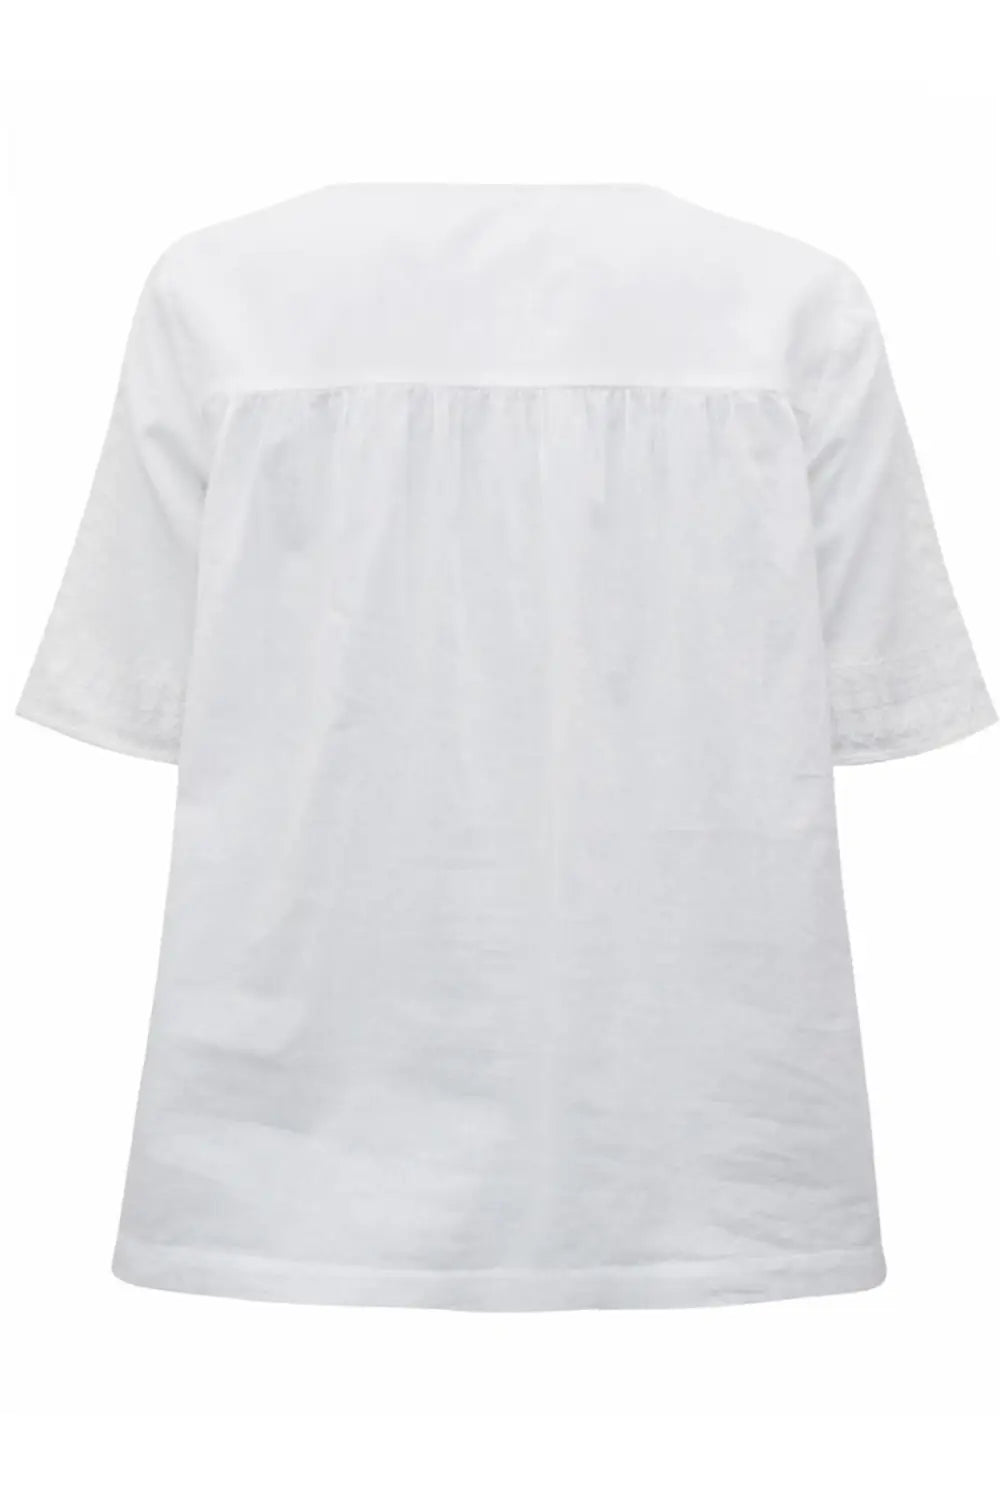 Boden Pure Cotton Alice Embroidered Top